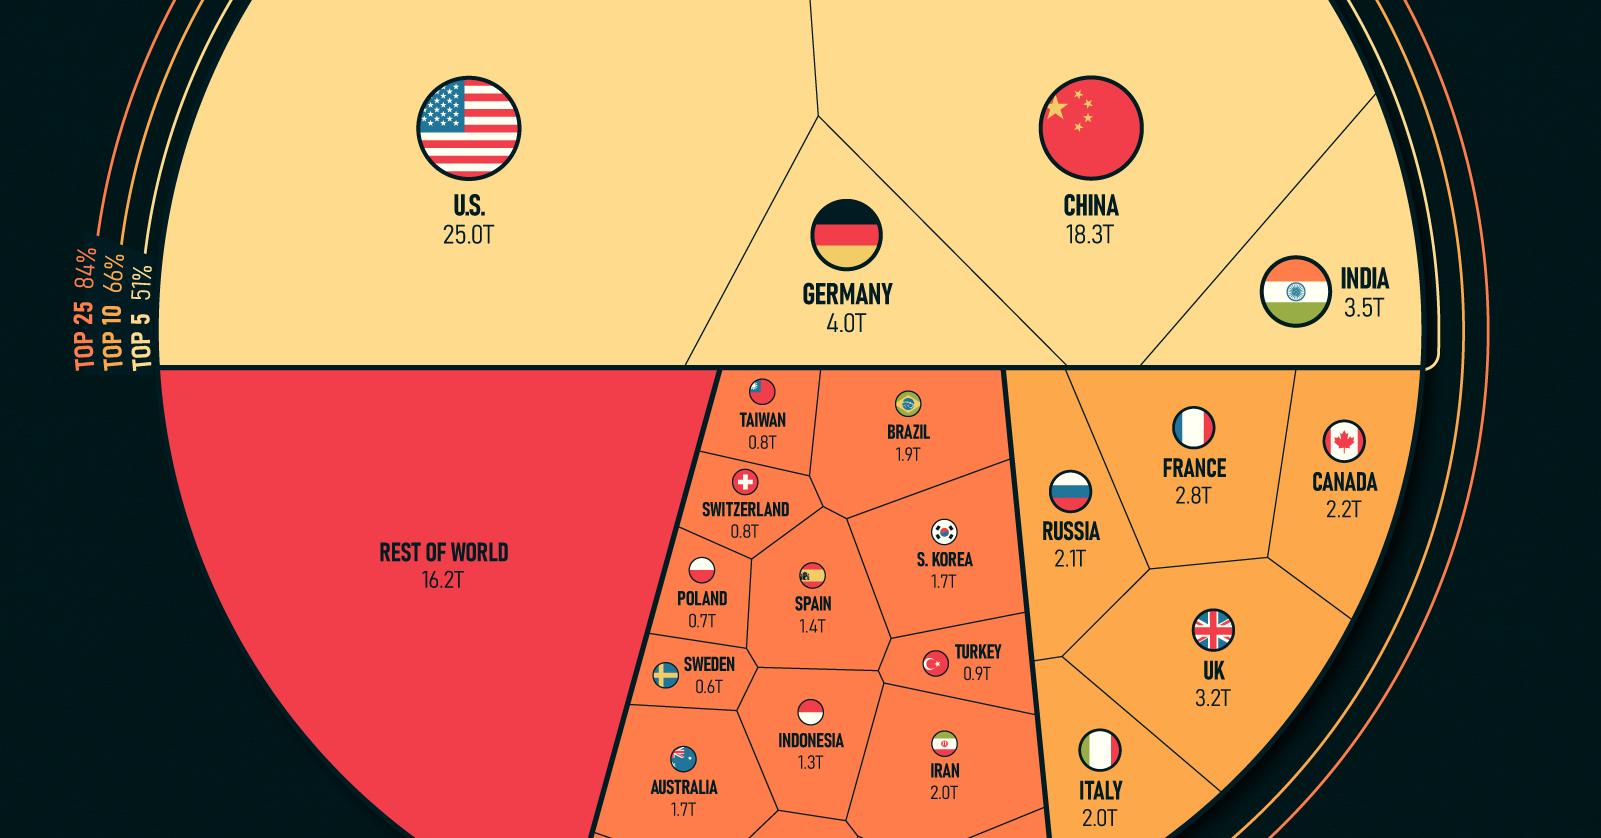 Top Heavy: Countries by Share of the Global Economy